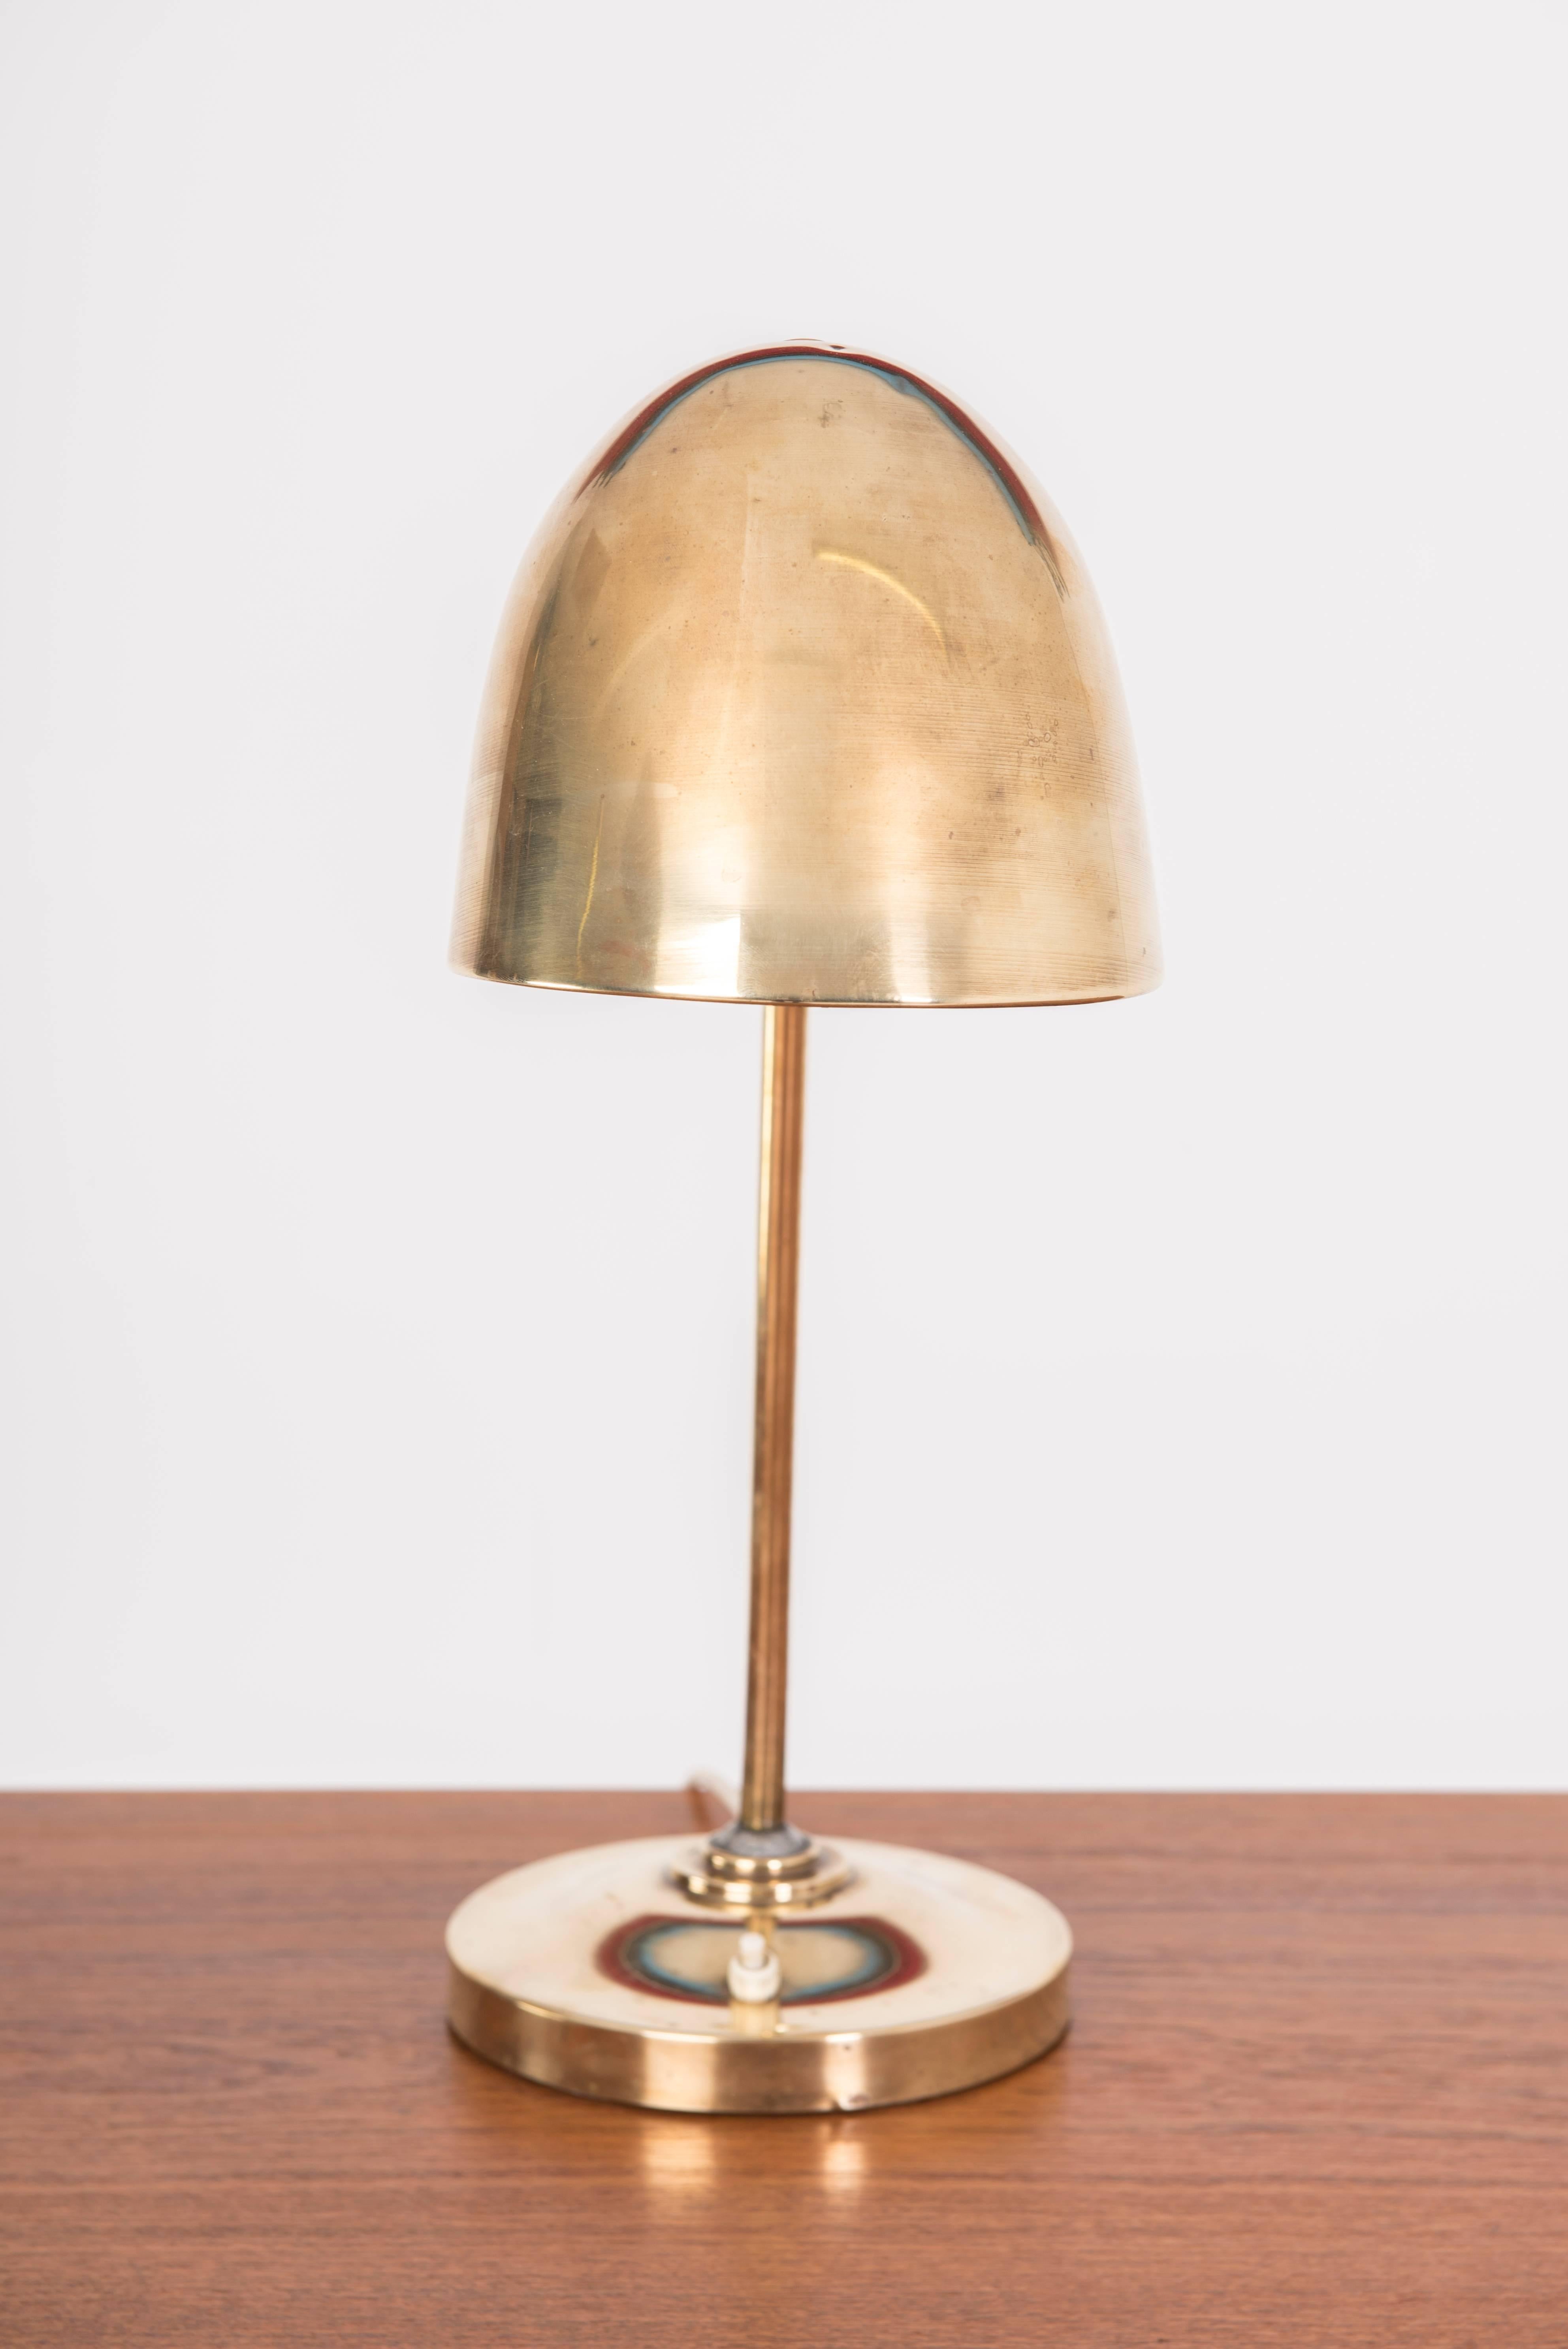 Vilhelm Lauritzen.

Table lamp with frame of brass with adjustable shade. Foot with switch.

Designed and made, circa 1940.